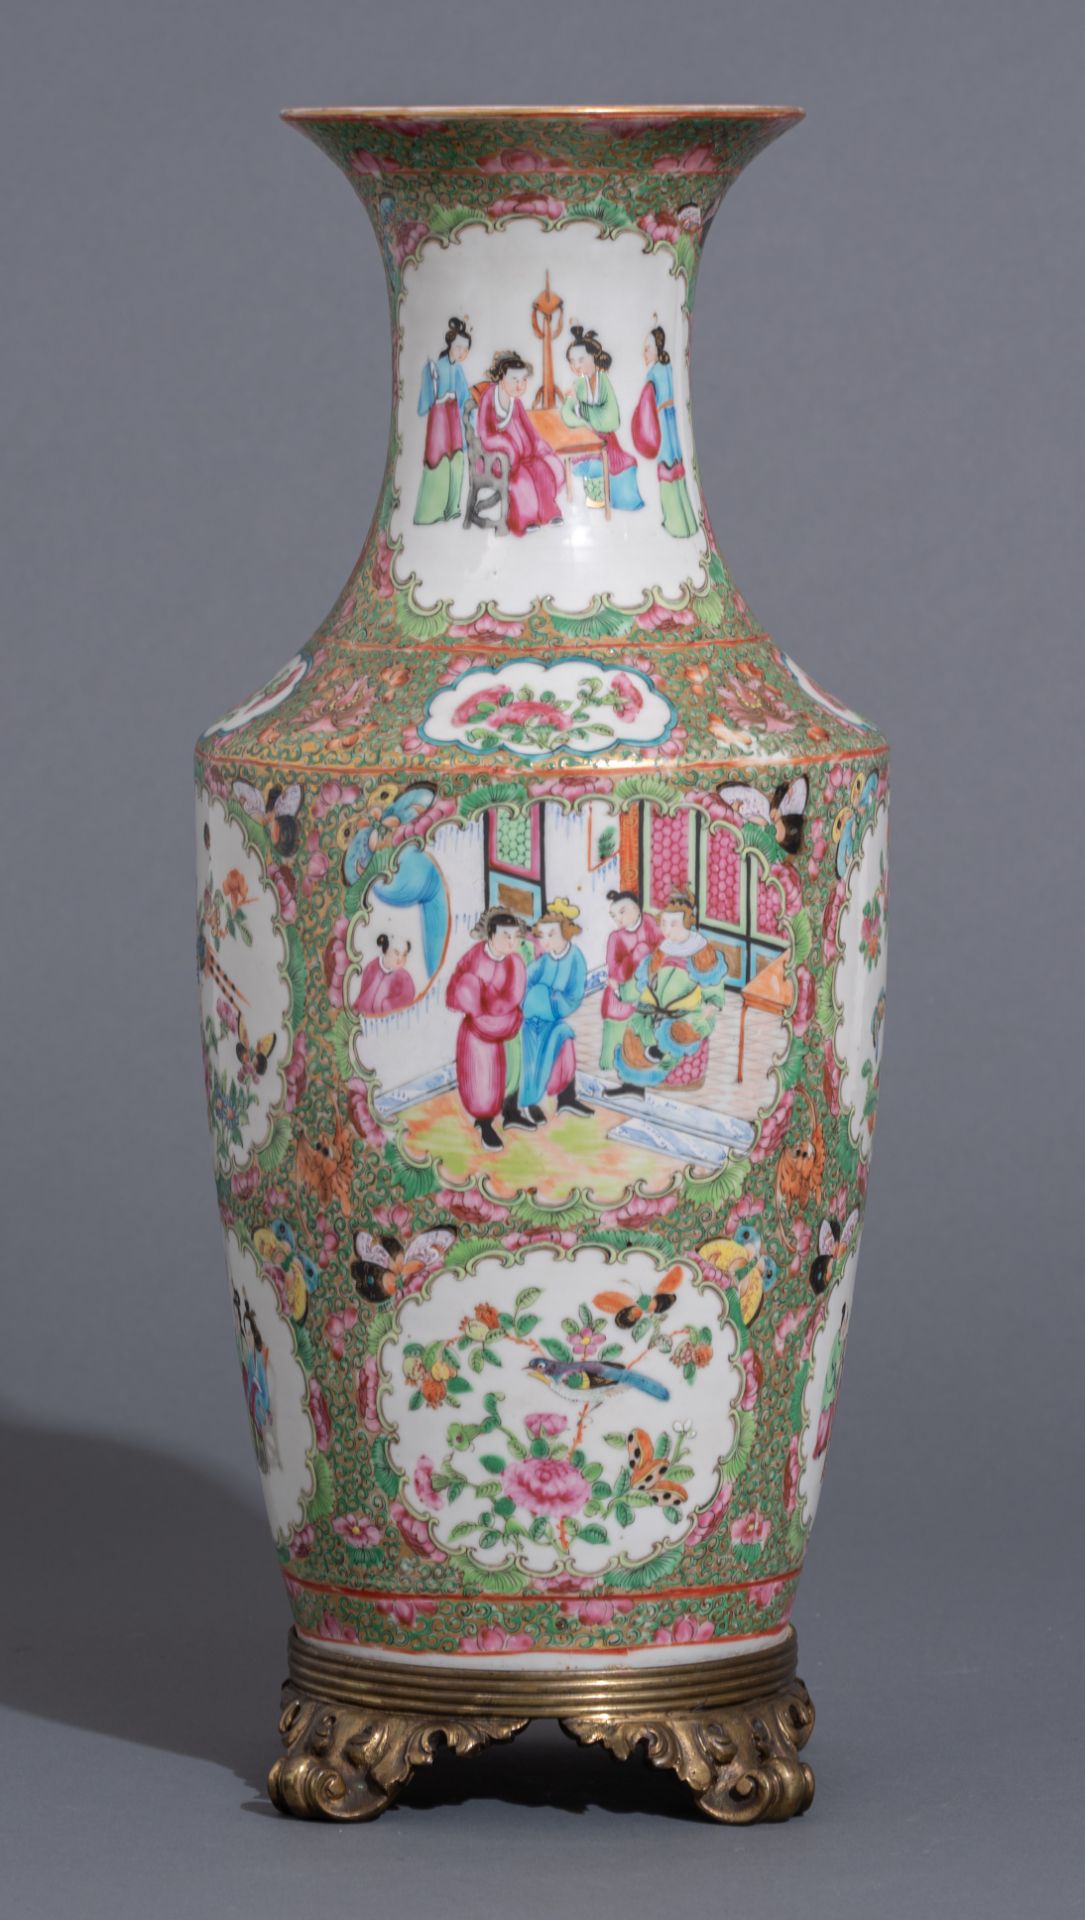 A collection of Chinese and Japanese porcelain items, 18th / 19th / 20thC, H 4 - 47 - ø 10,5 - 23 cm - Image 5 of 19